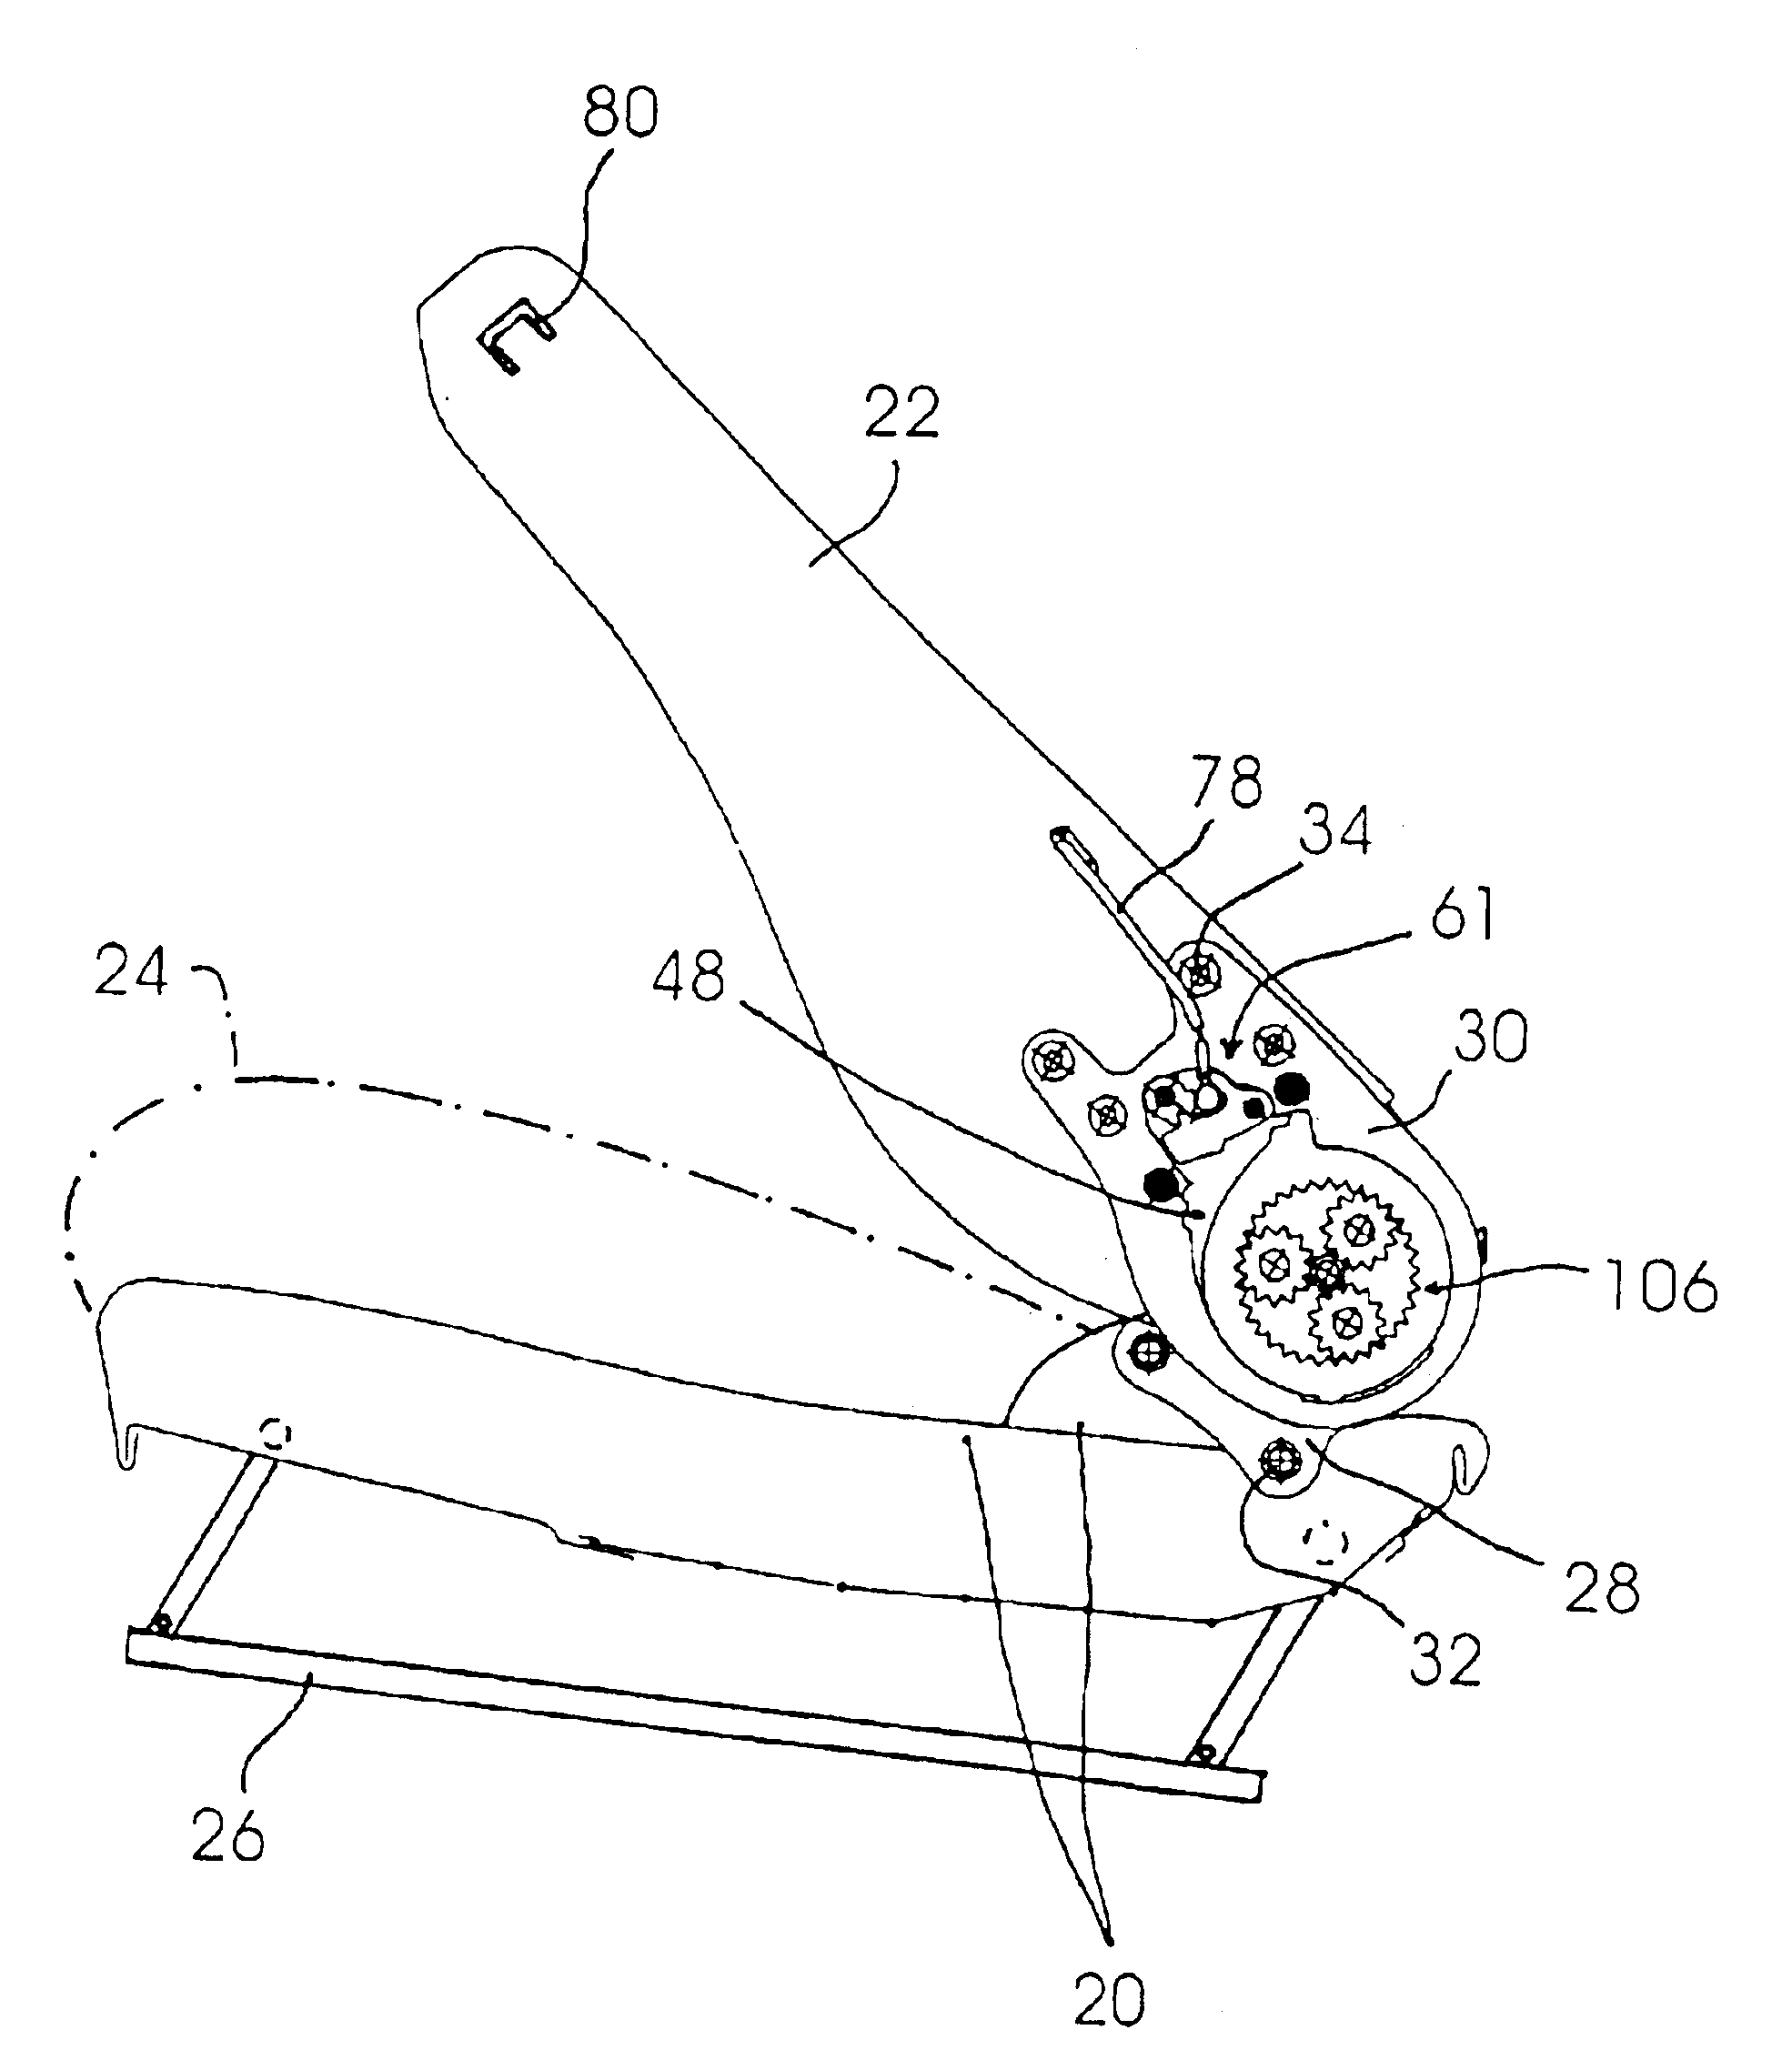 Seat back hinge fitting for a motor vehicle seat